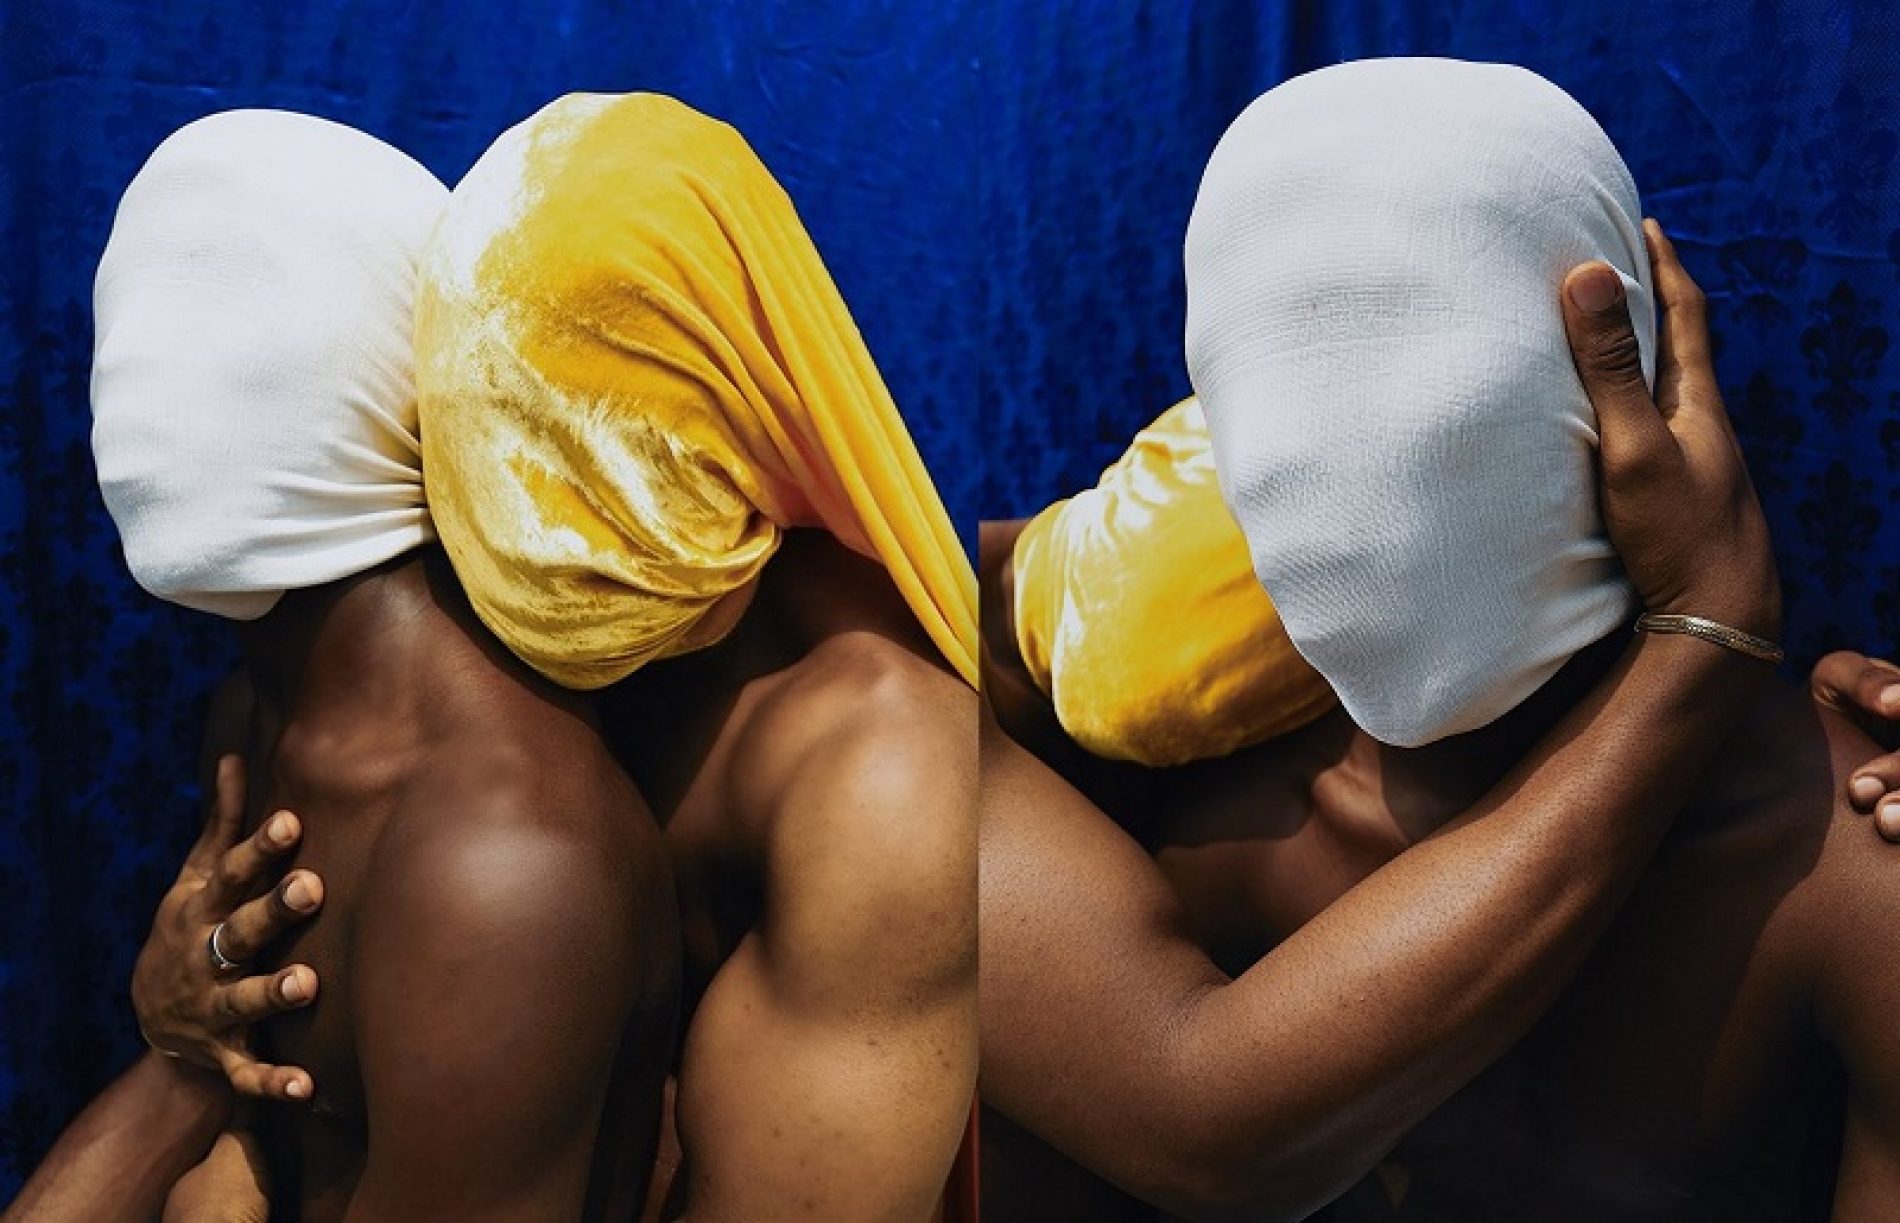 Ever Wondered What It’s Like To Be A Gay Porn Star In Nigeria?